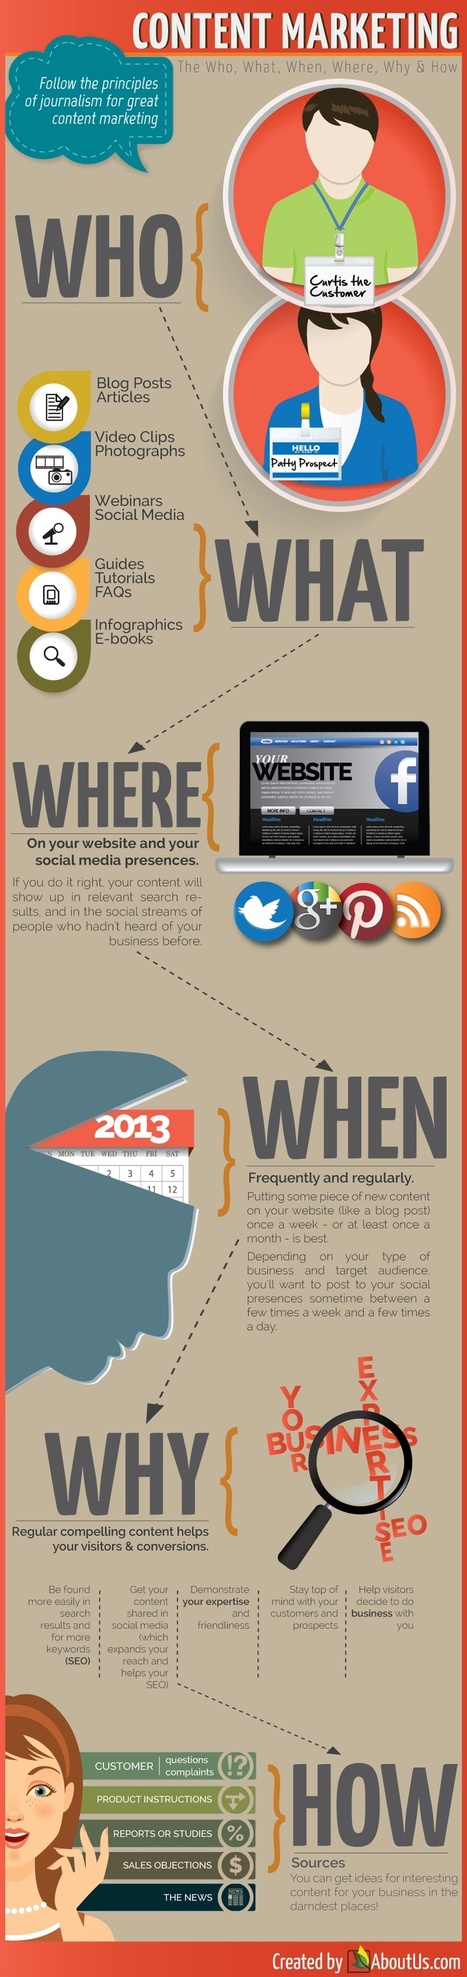 Content Marketing Is The New SEO [Infographic] | Information Technology & Social Media News | Scoop.it